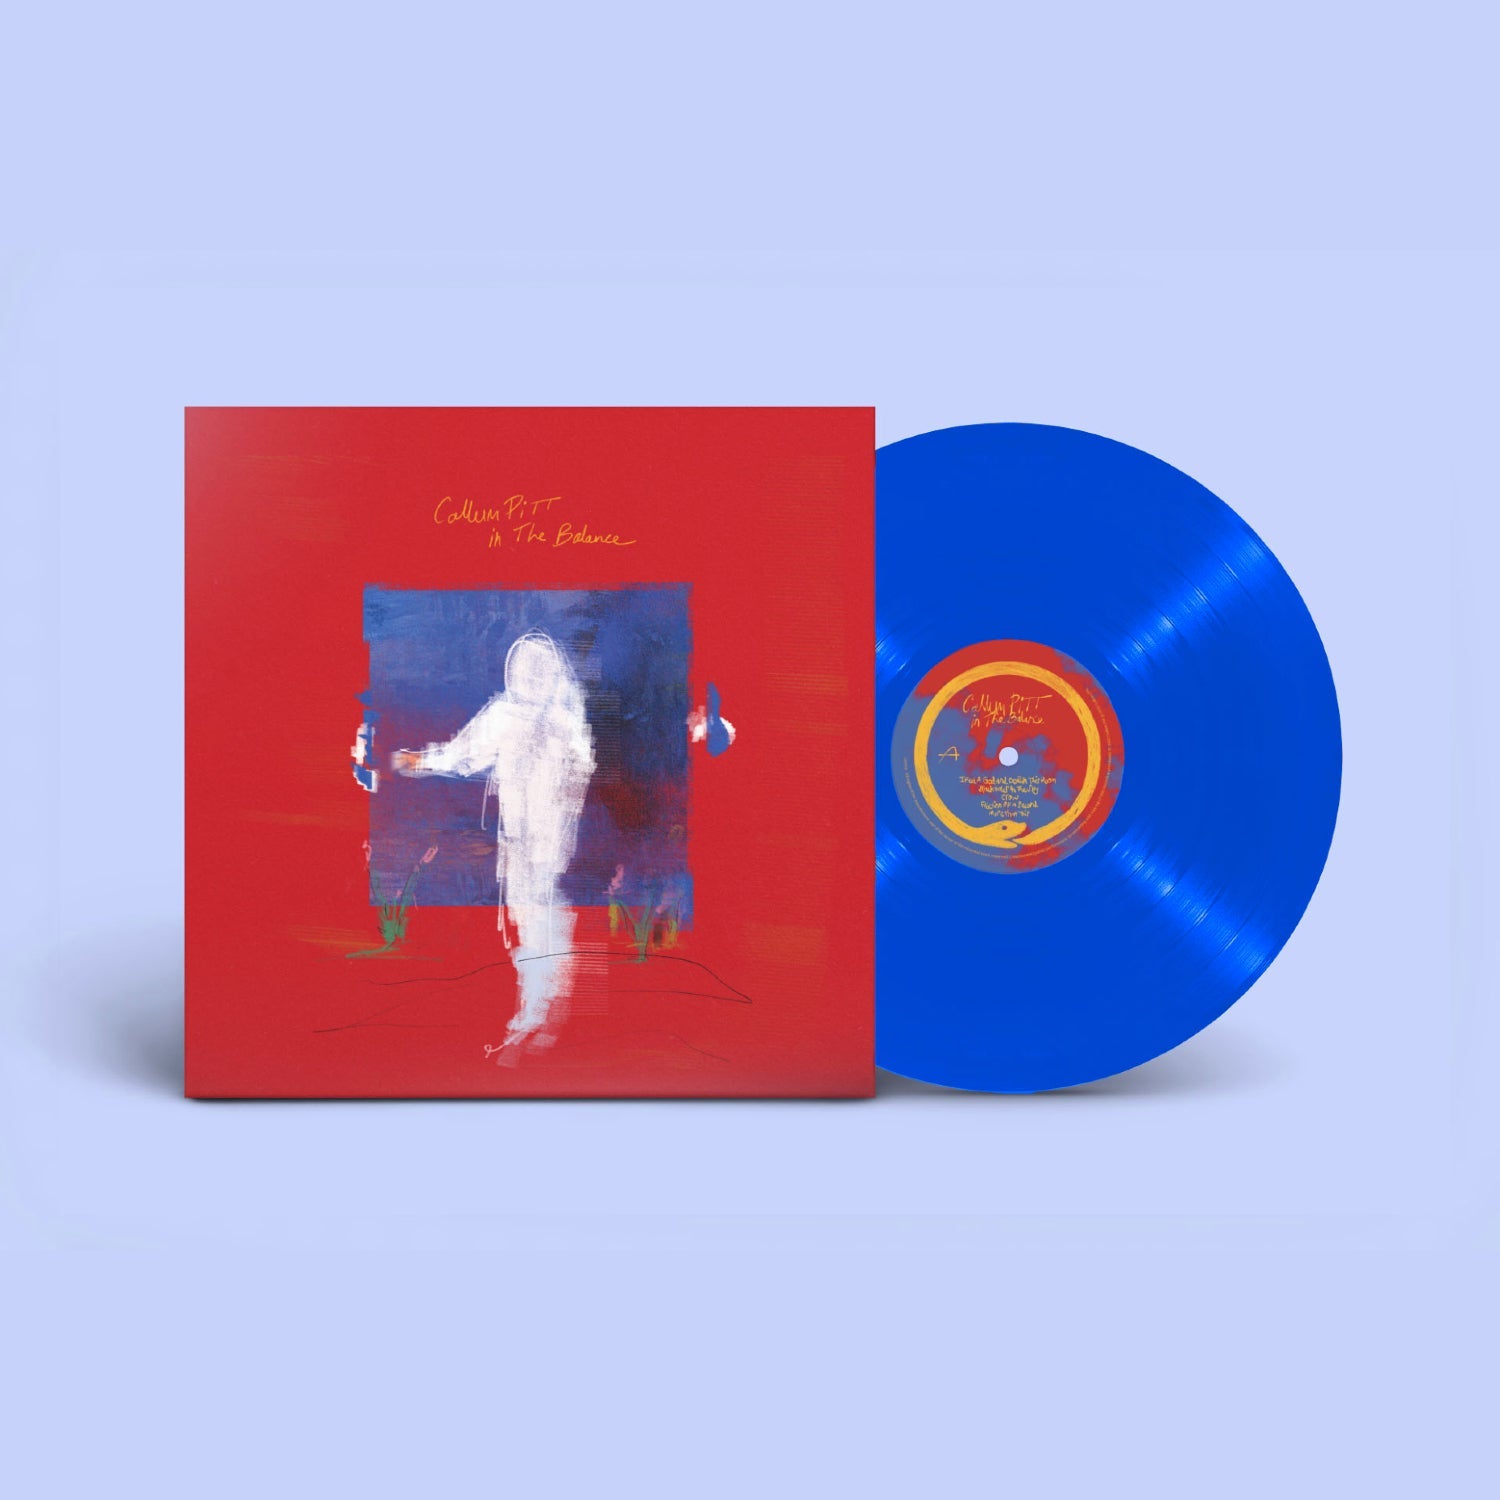 In The Balance: Limited Edition Blue Vinyl LP + Signed Print